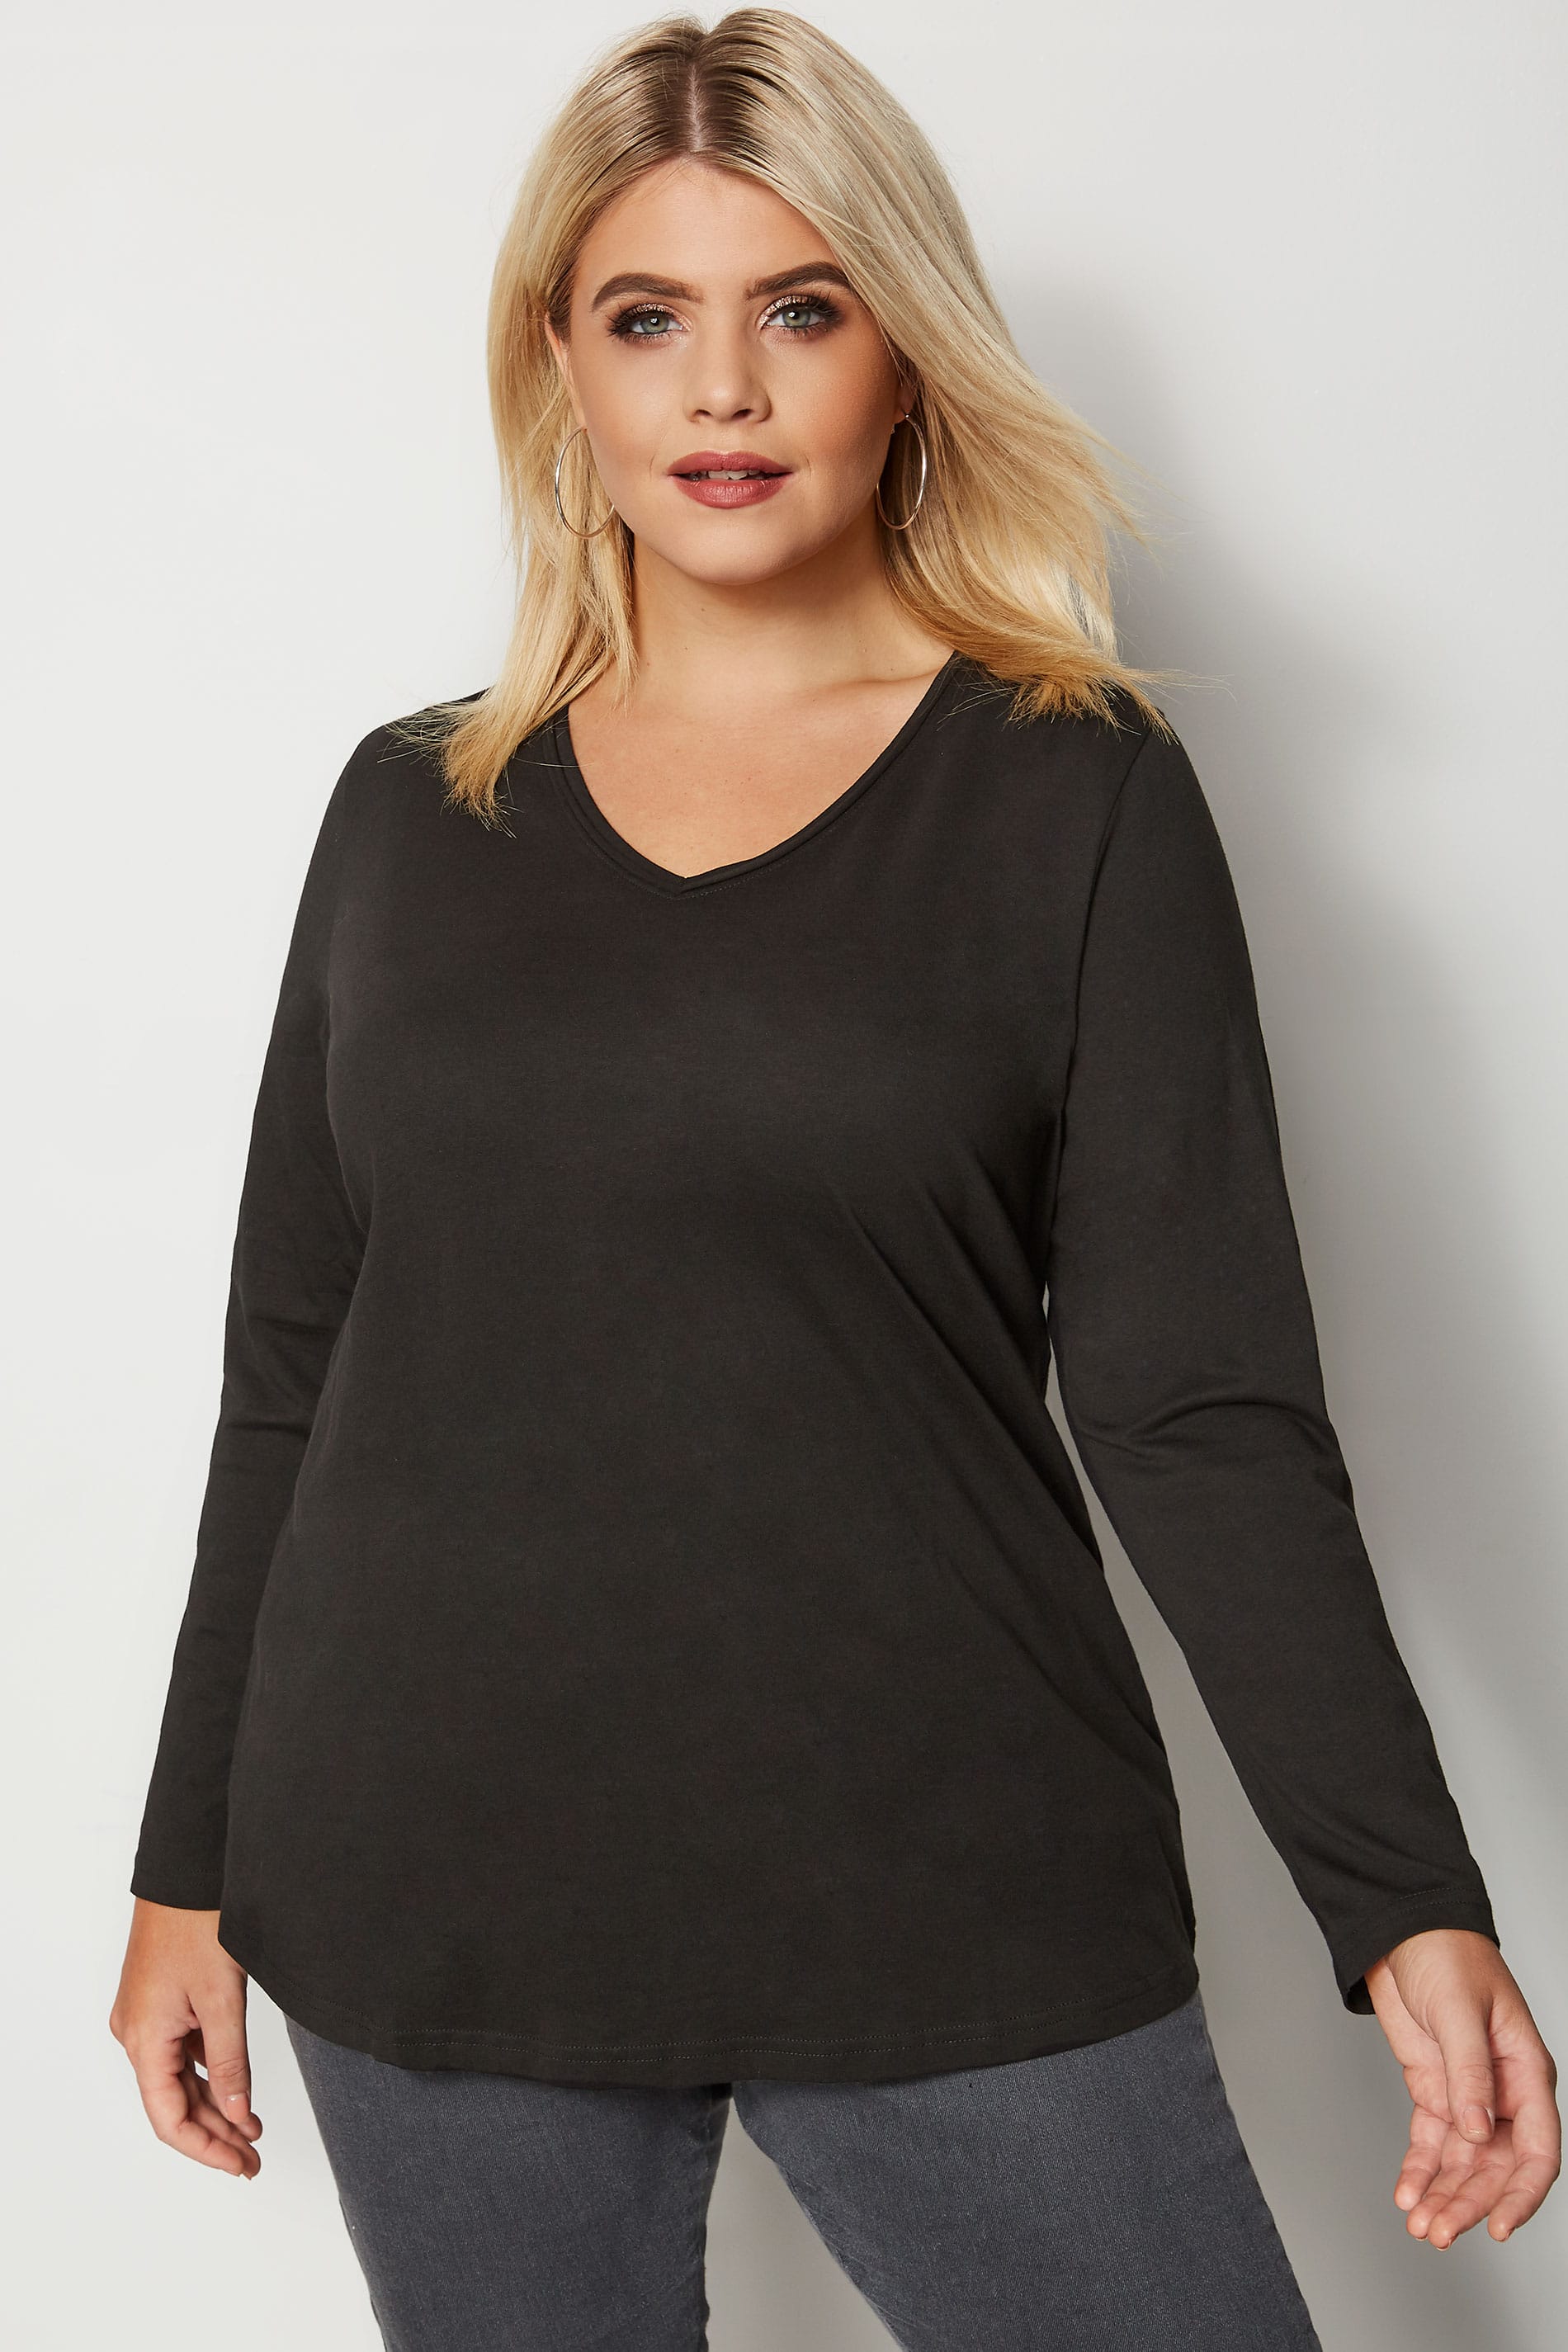 Dark Grey Long Sleeved V-Neck Jersey Top, Plus size 16 to 36